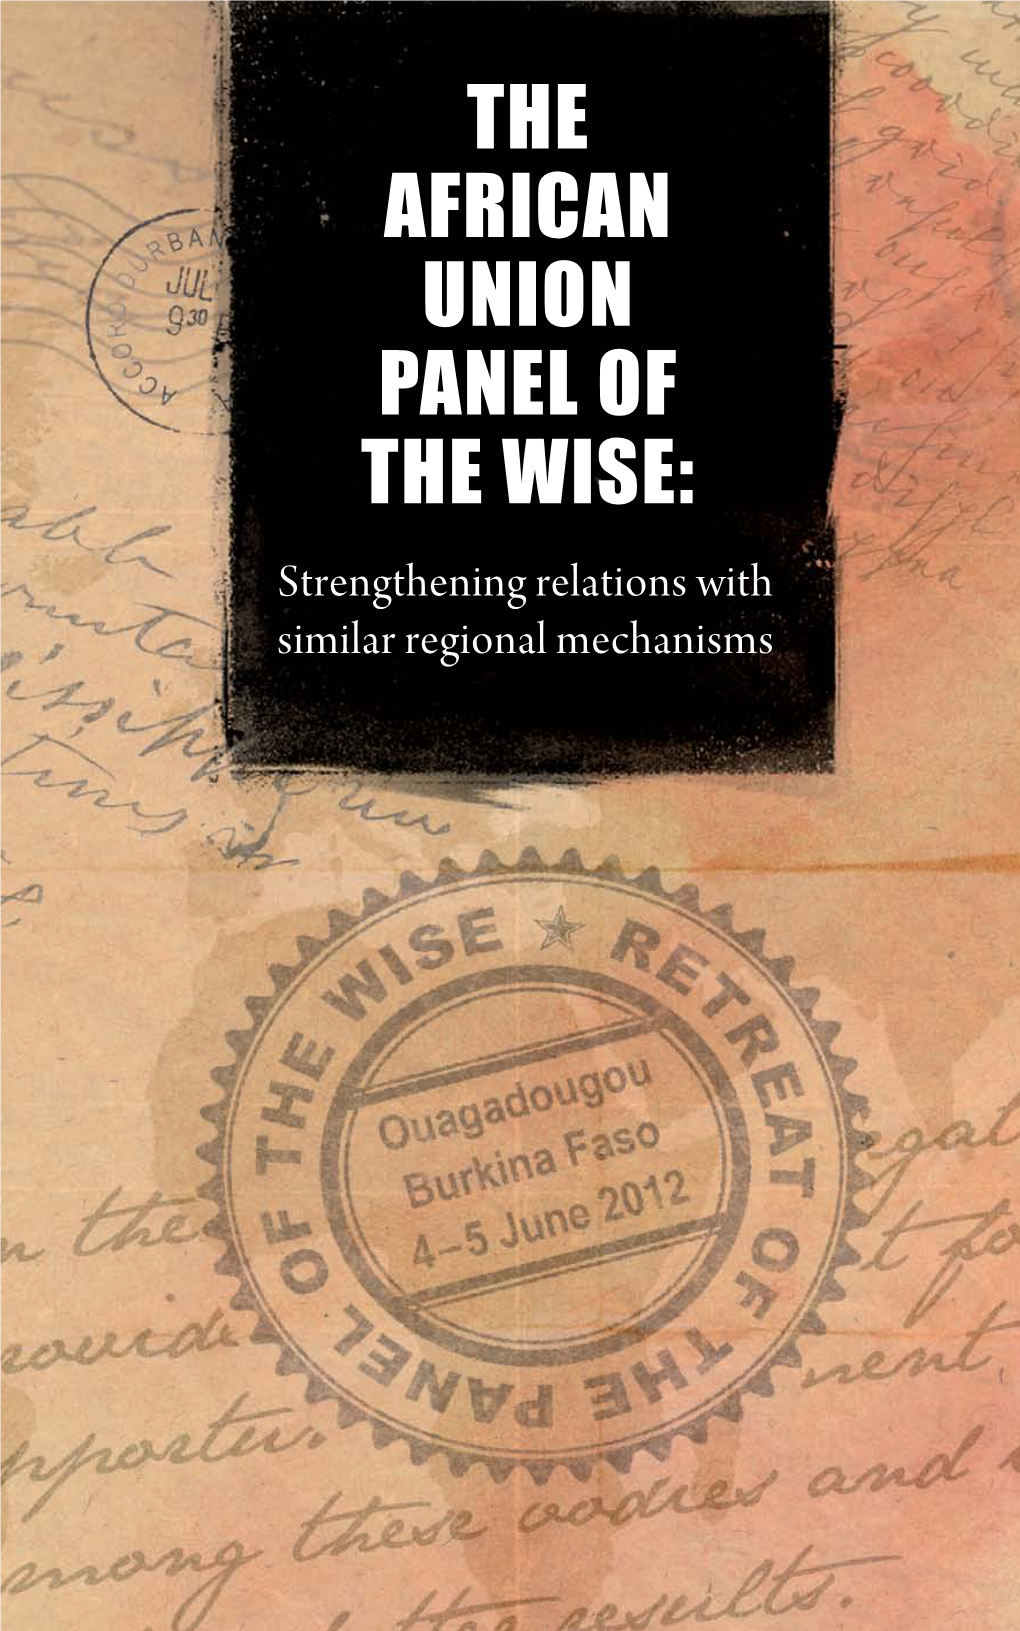 AU Panel of the Wise: Strengthening Relations with Similar Regional Mechanisms